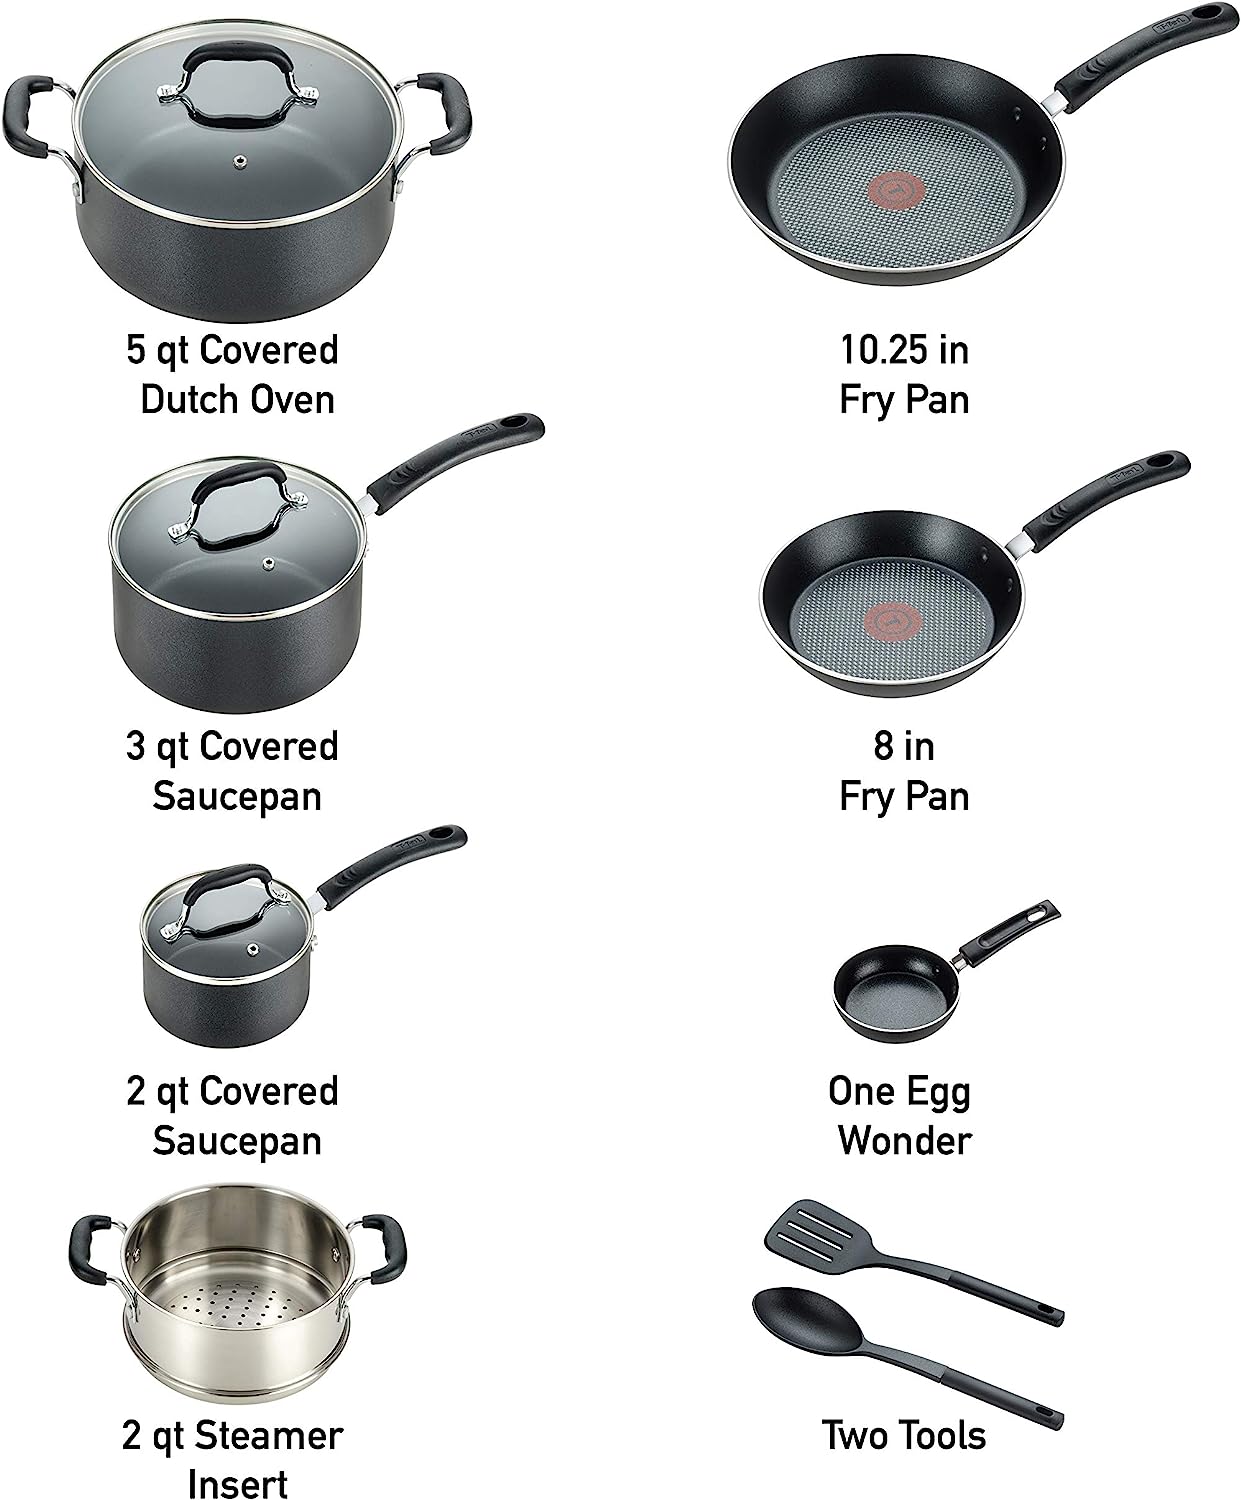 T-fal Experience Nonstick Cookware Set 12 Piece Induction Pots and Pans,  Dishwasher Safe Black